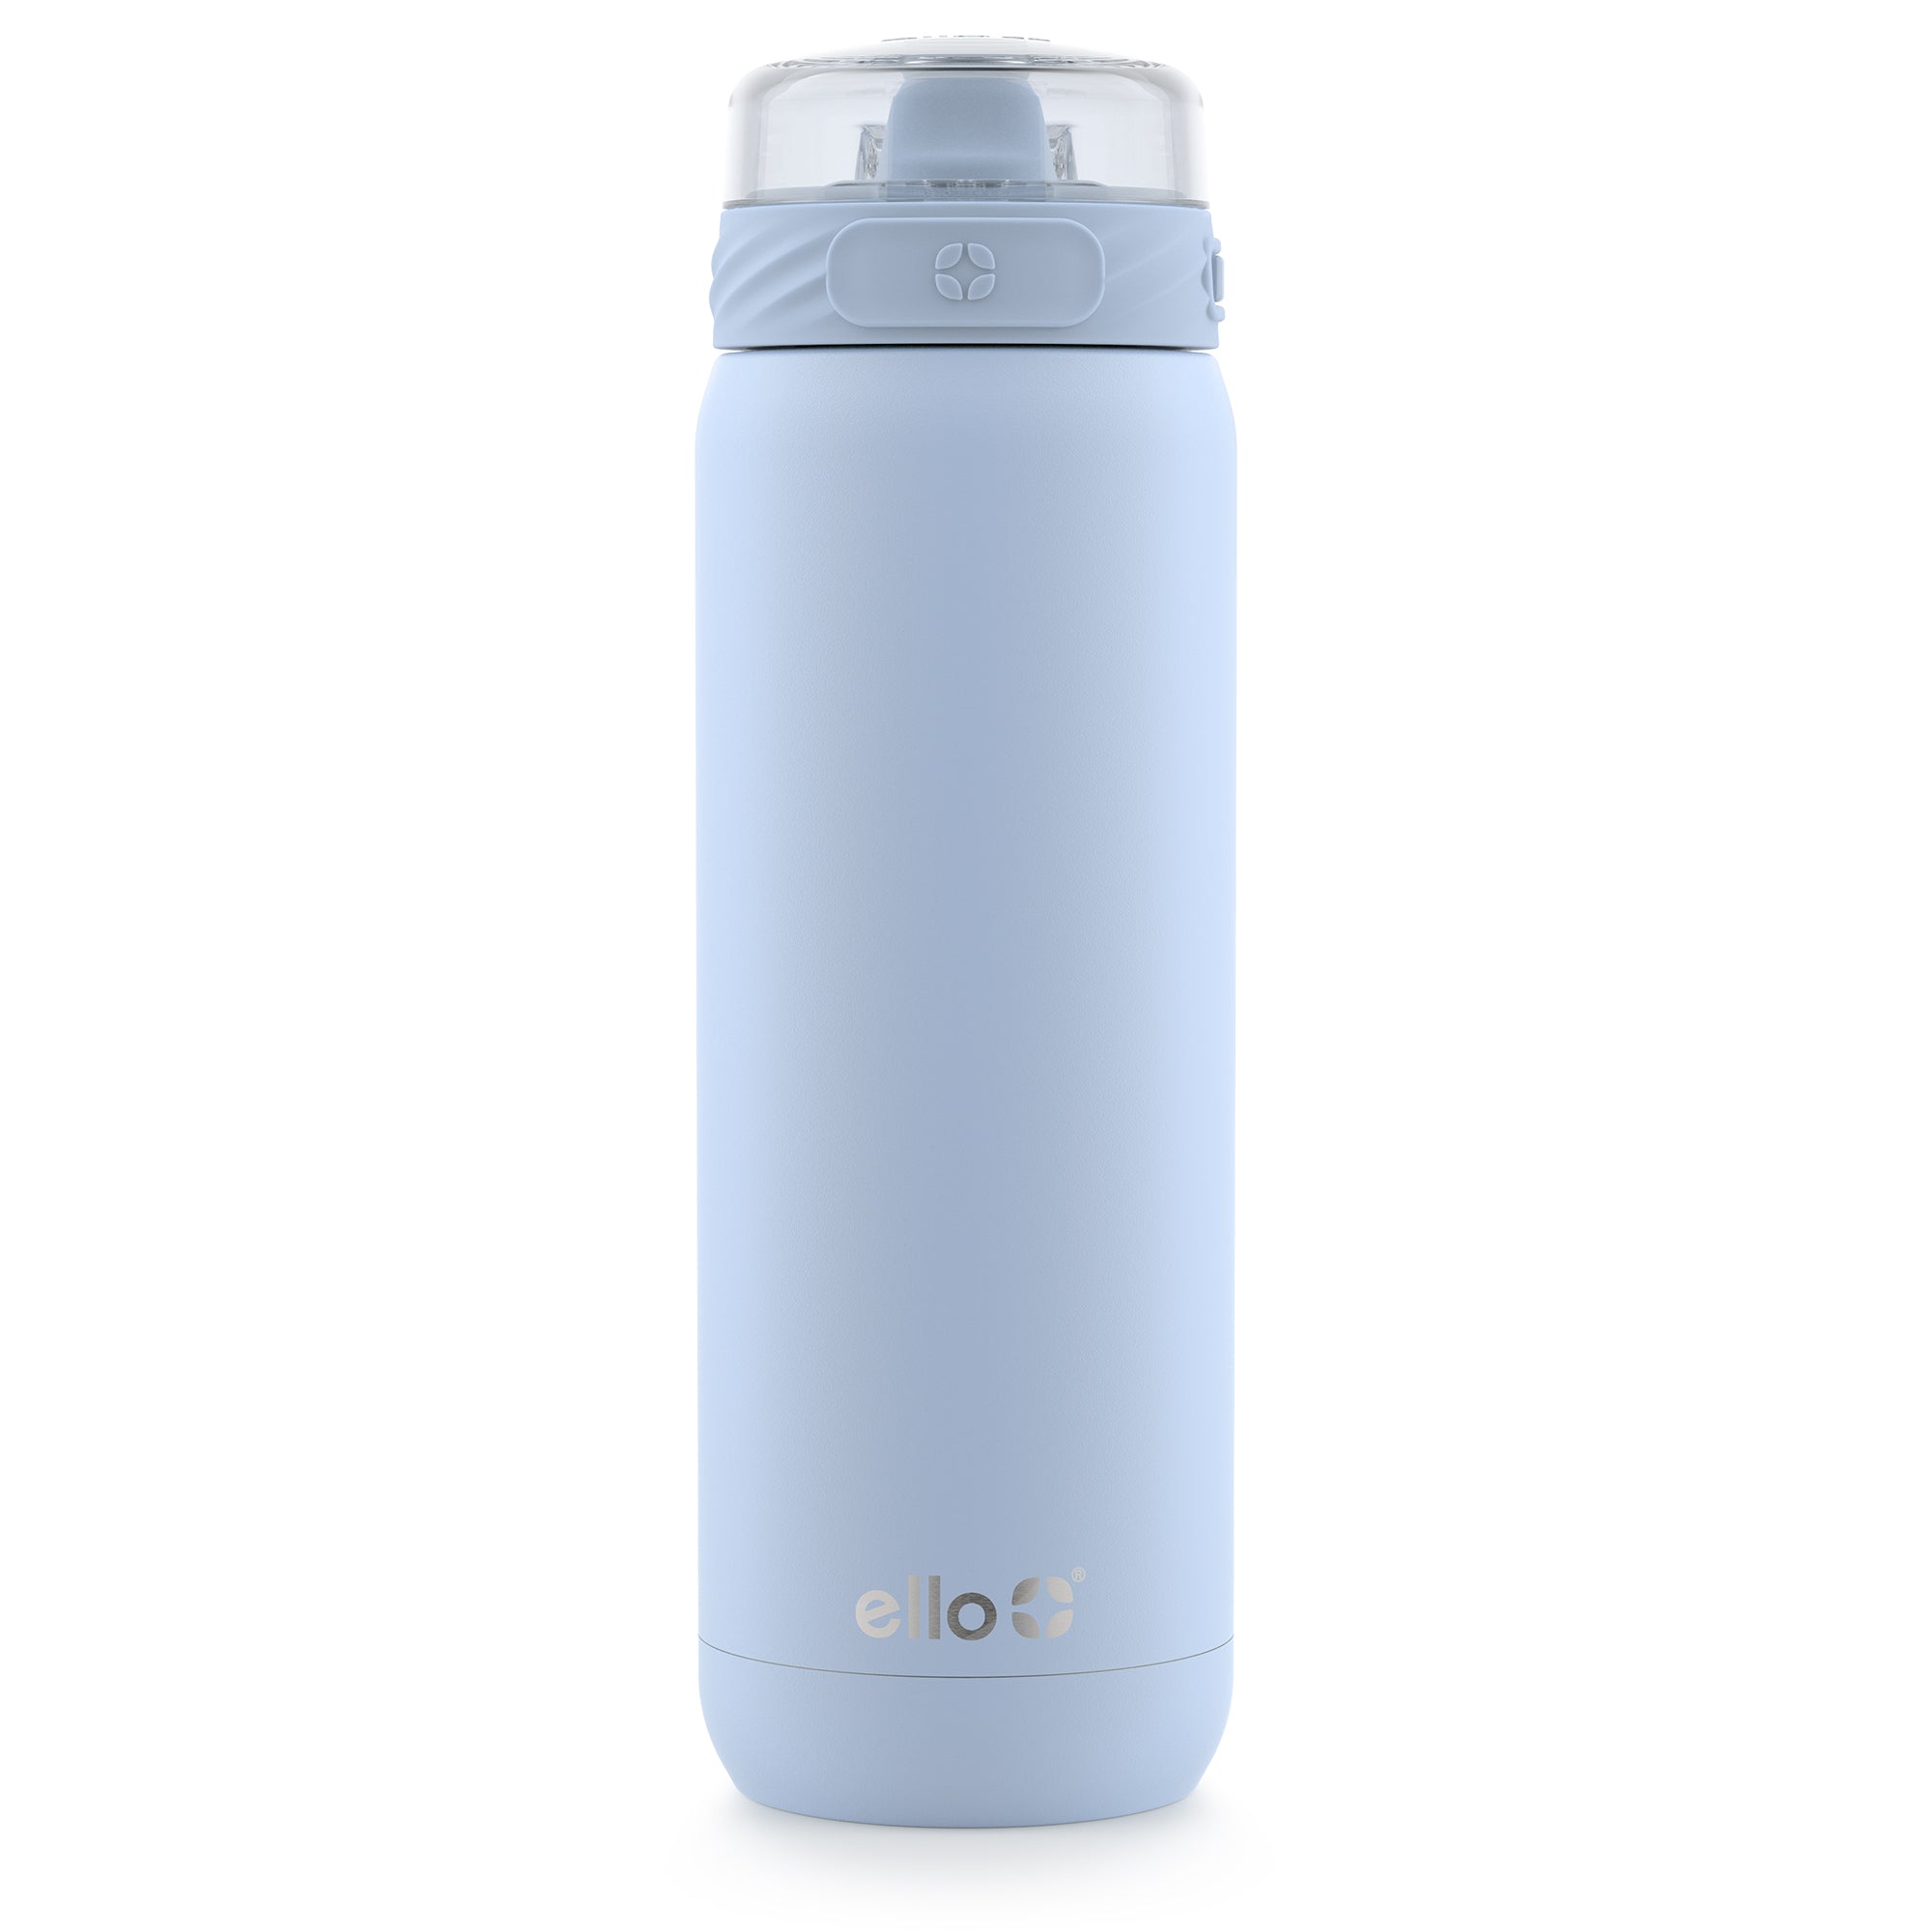 Ello Cooper Vacuum Insulated Stainless Steel Water Bottle, 22 oz